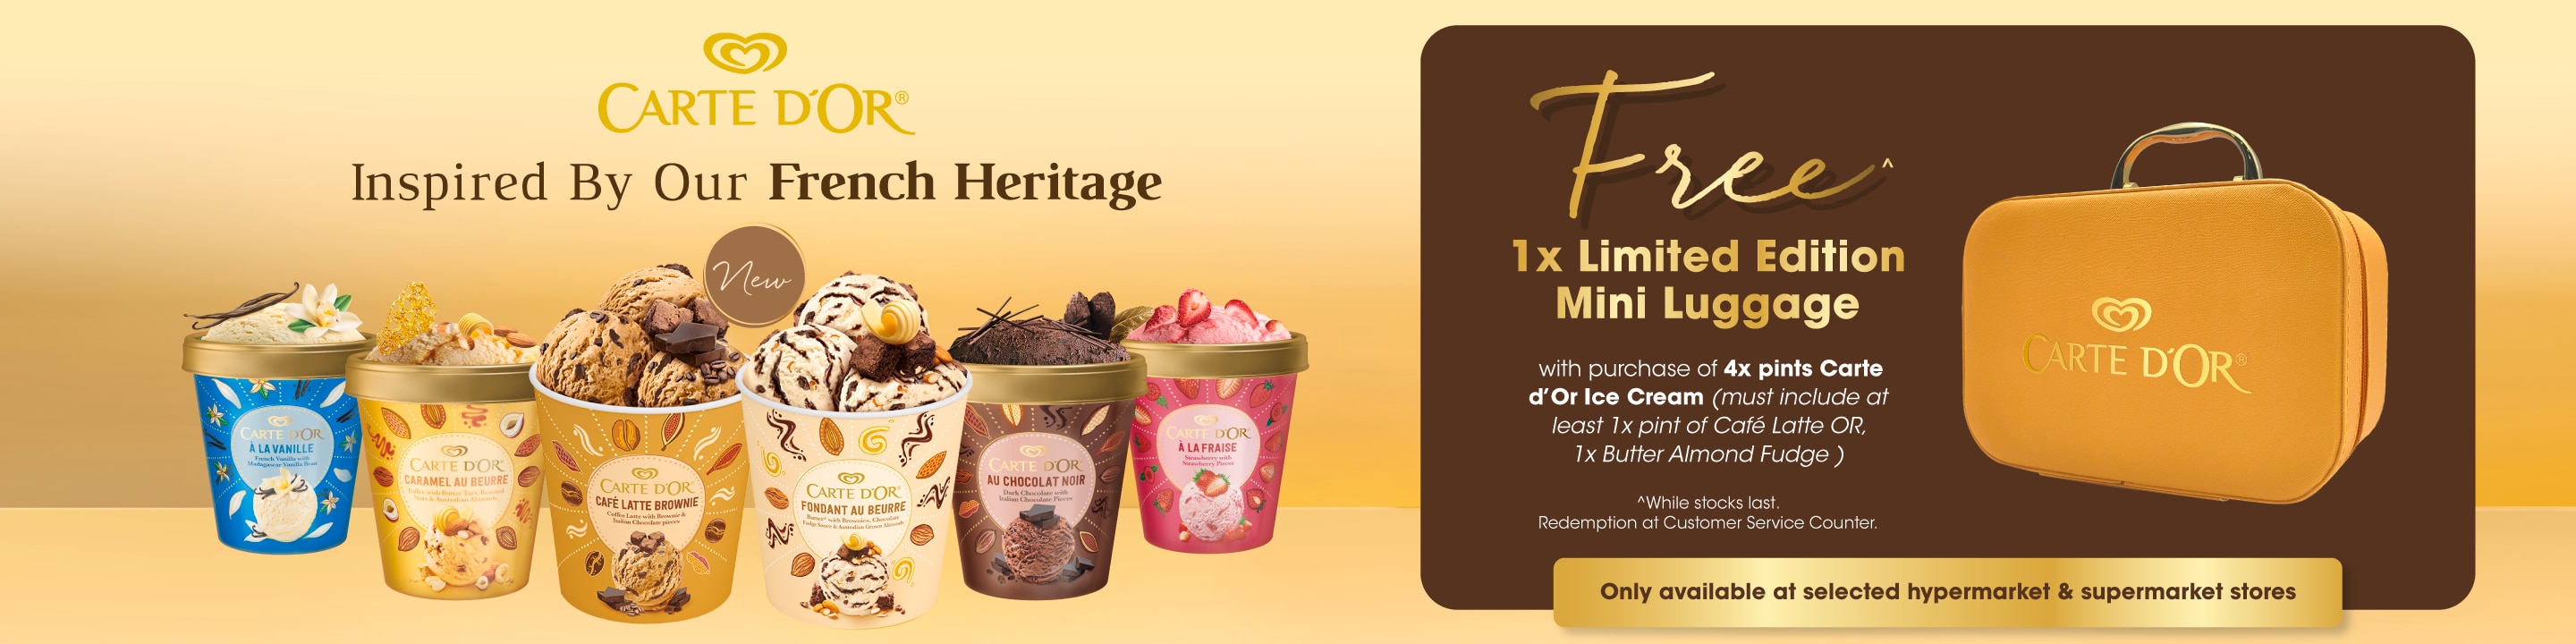 carte d'or ice cream free limited edition mini luggage with purchase of 4 pints 